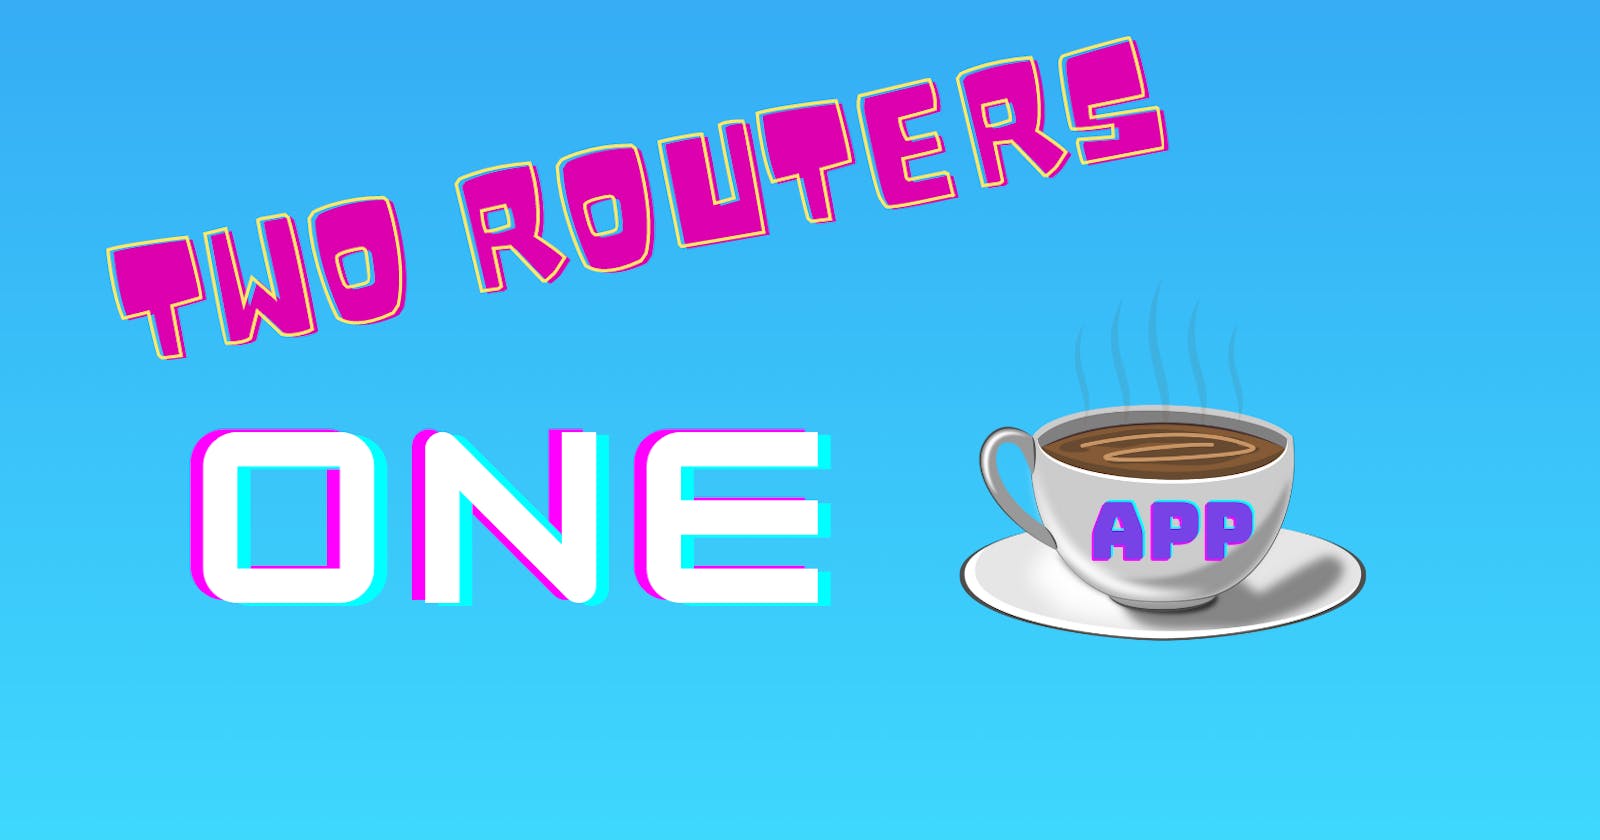 Two Routers - One App